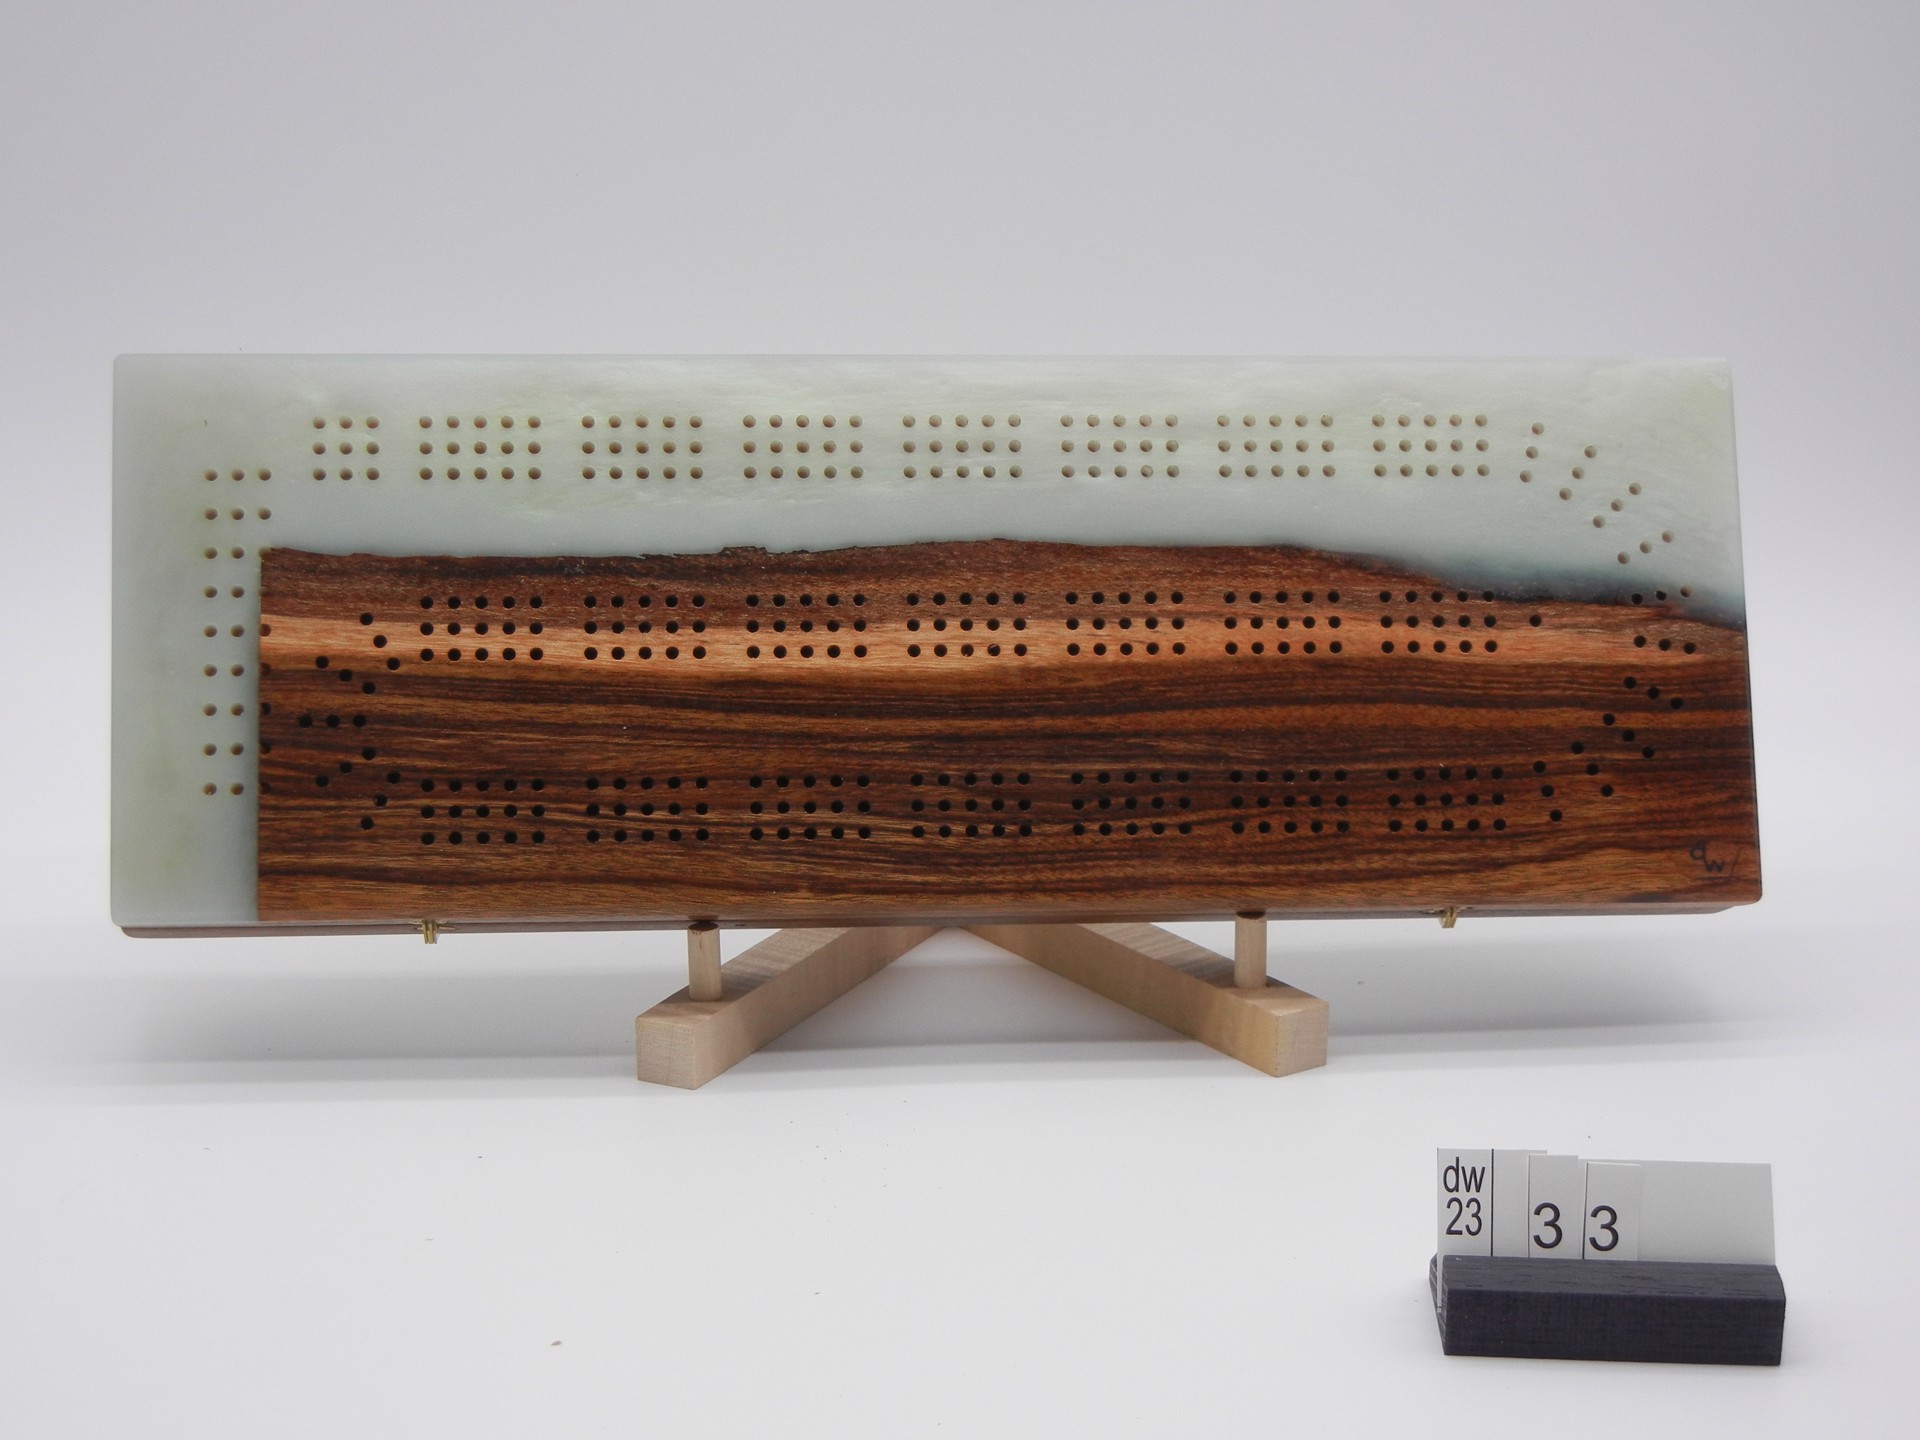 33 Cribbage Board (Three Person, with Pegs & Cards) by Dan Wieske